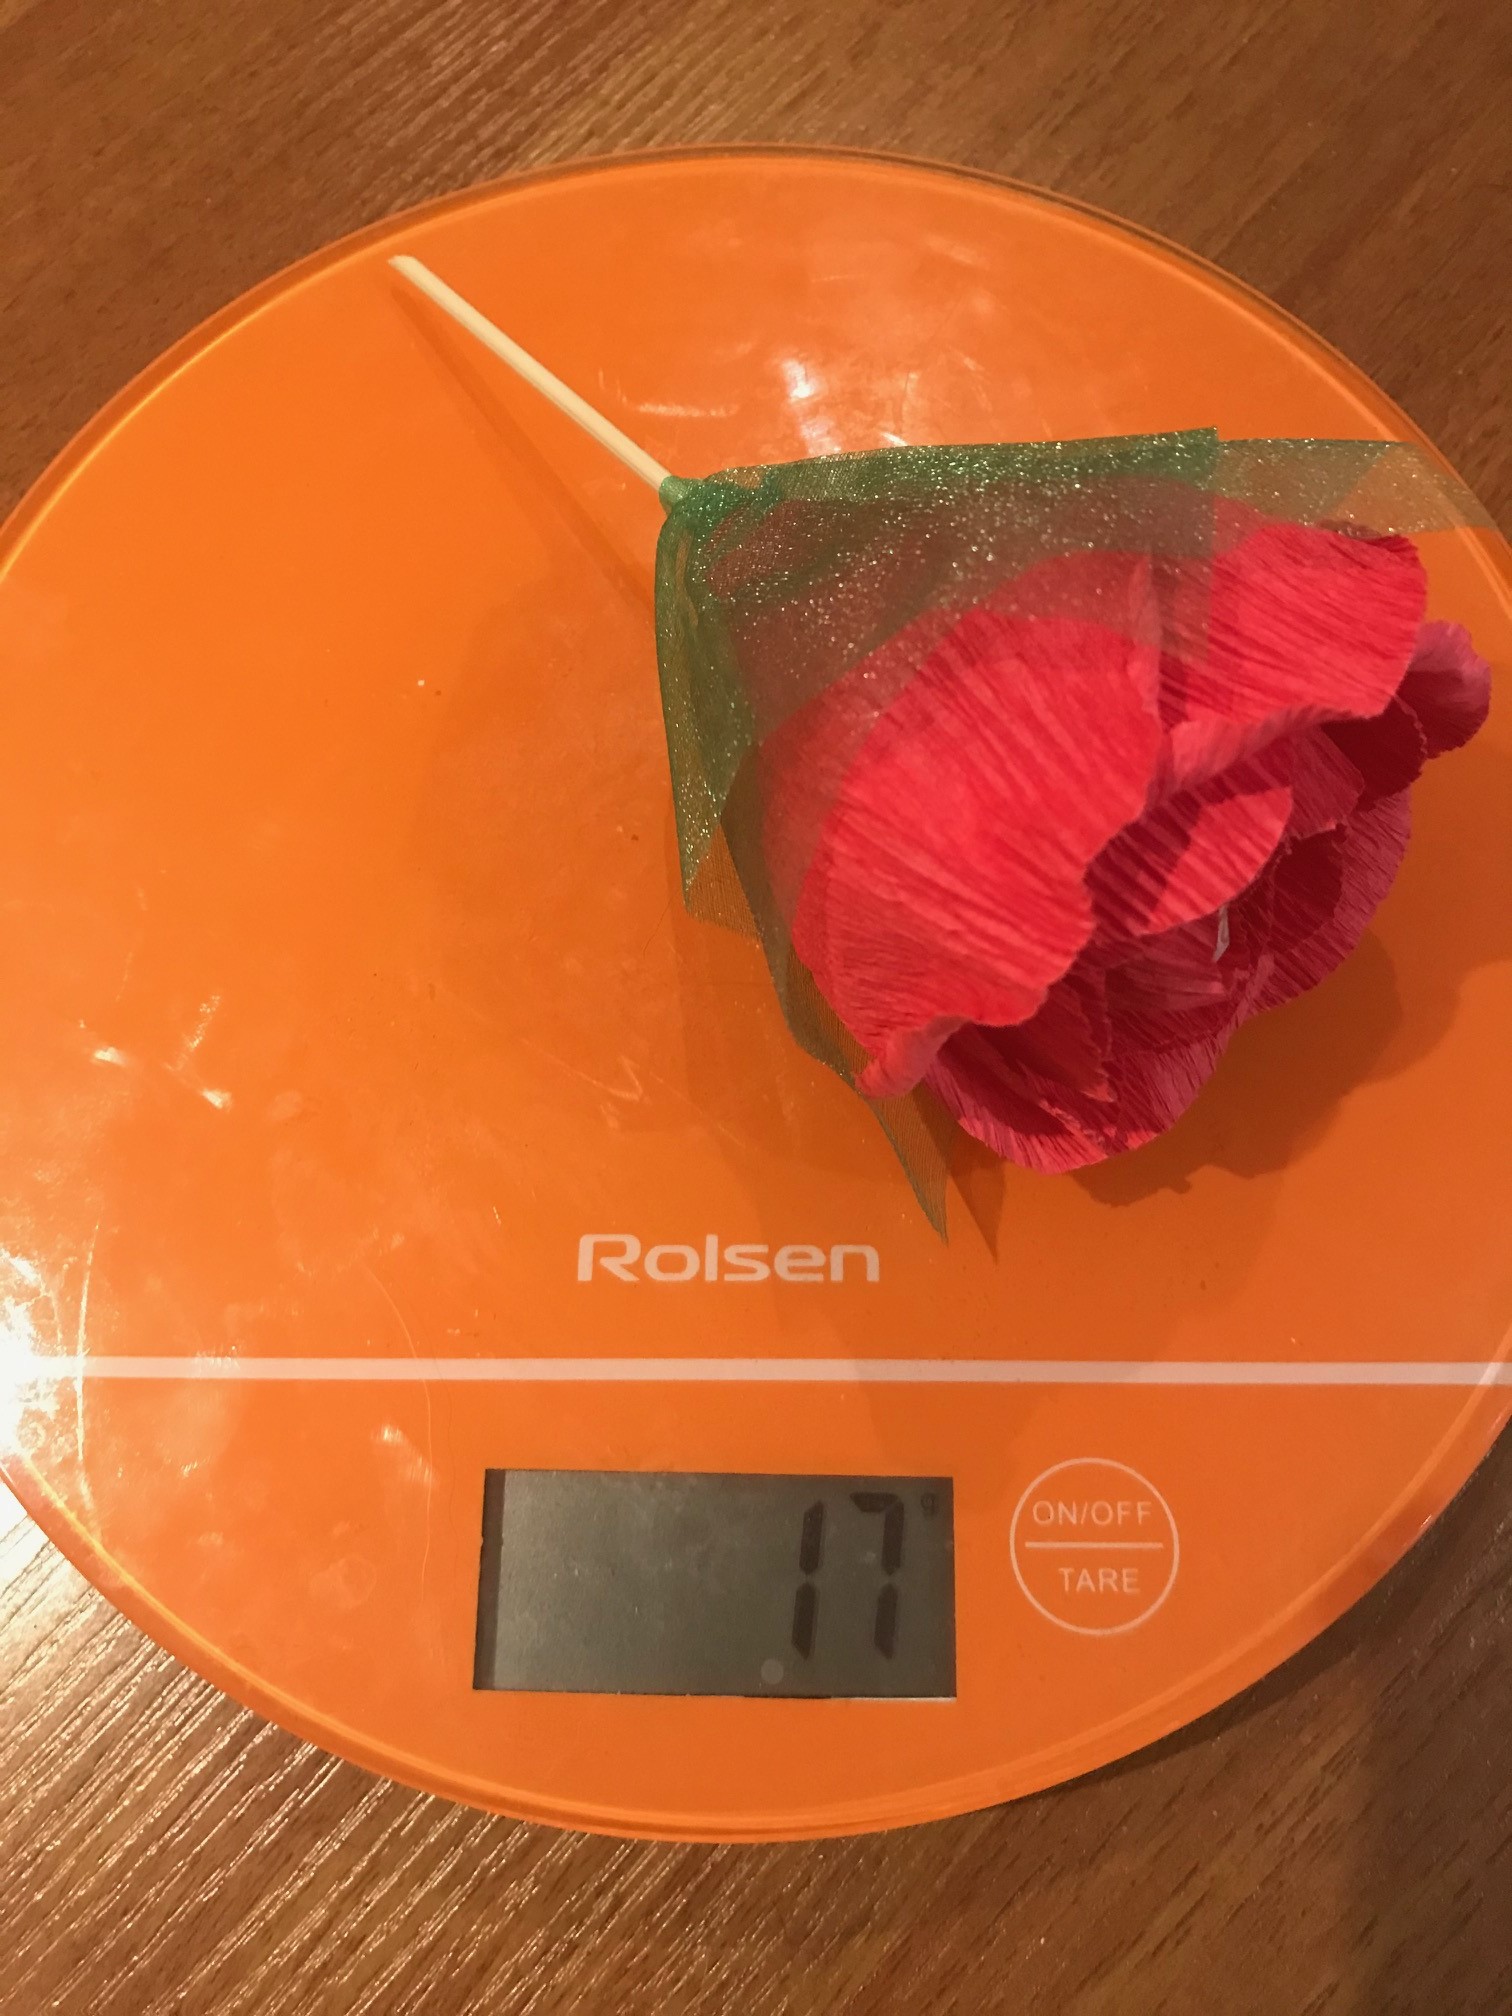 How much does a paper flower weigh?